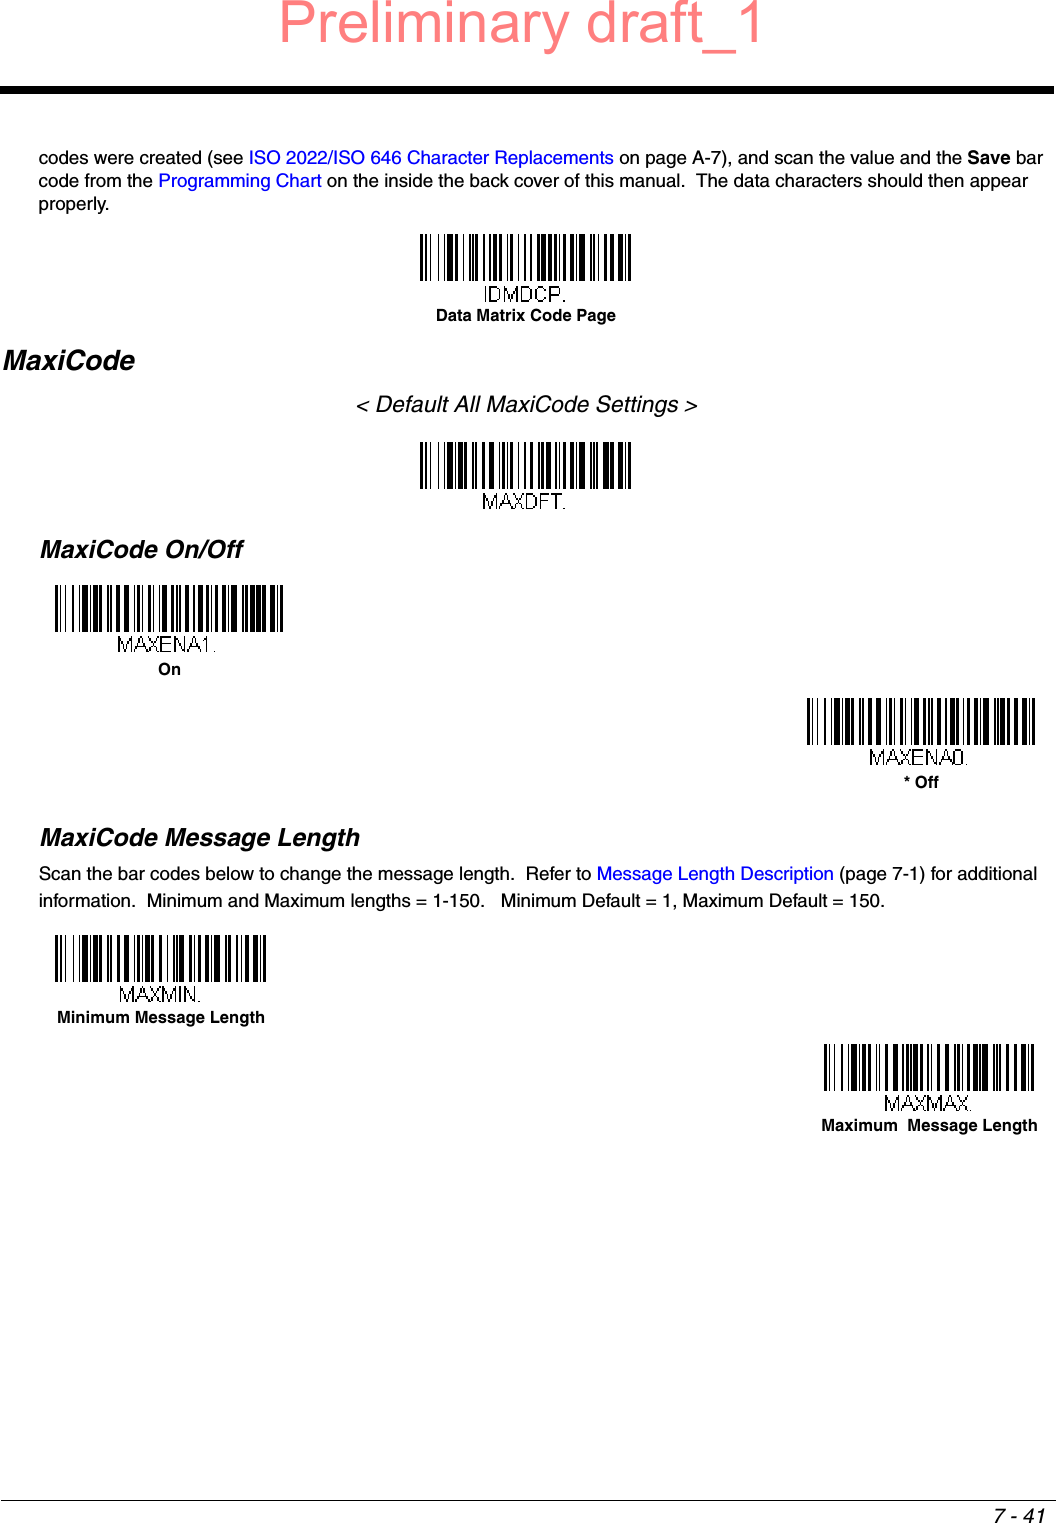 7 - 41codes were created (see ISO 2022/ISO 646 Character Replacements on page A-7), and scan the value and the Save bar code from the Programming Chart on the inside the back cover of this manual.  The data characters should then appear properly.MaxiCode&lt; Default All MaxiCode Settings &gt;MaxiCode On/OffMaxiCode Message LengthScan the bar codes below to change the message length.  Refer to Message Length Description (page 7-1) for additional information.  Minimum and Maximum lengths = 1-150.   Minimum Default = 1, Maximum Default = 150.Data Matrix Code PageOn* OffMinimum Message LengthMaximum  Message LengthPreliminary draft_1